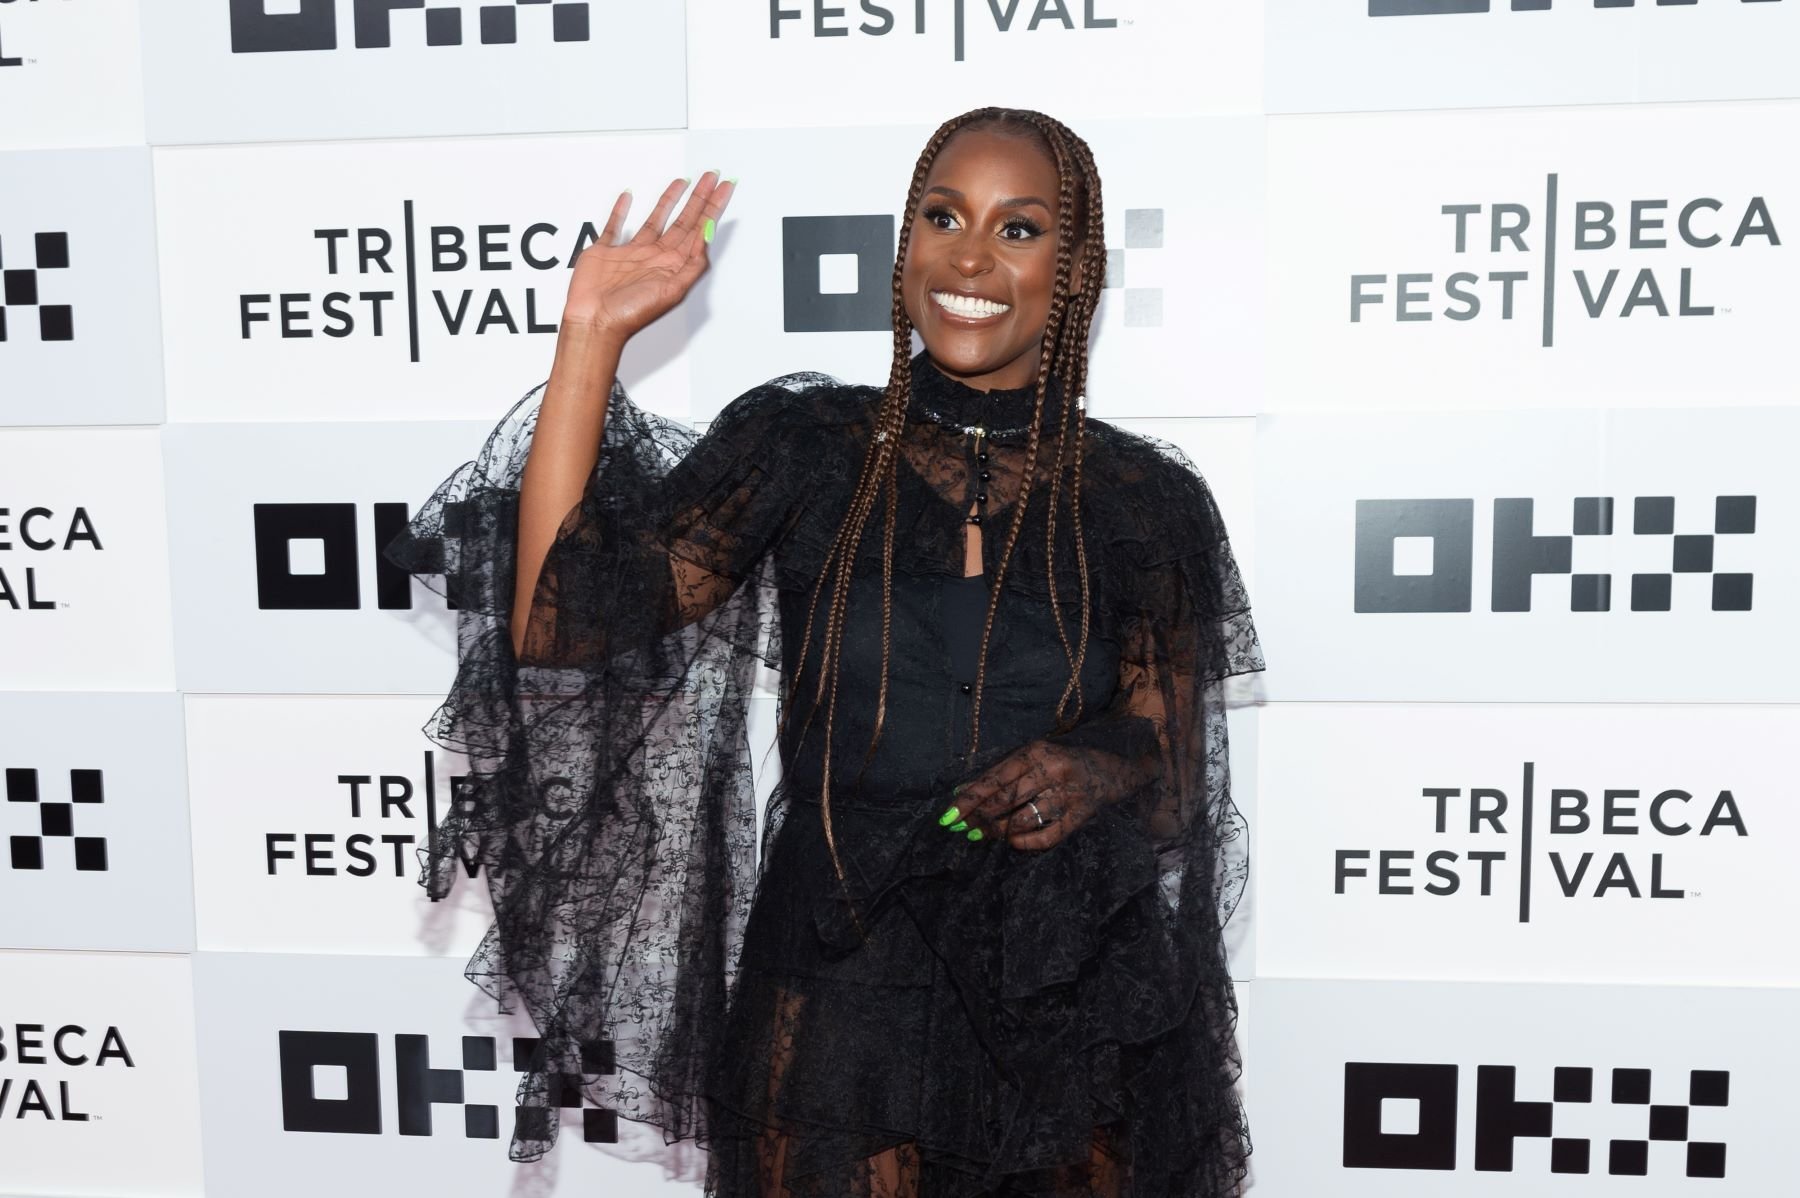 Issa Rae attending the premiere of 'Vengeance' at the 2022 Tribeca Festival at BMCC Tribeca PAC in New York City